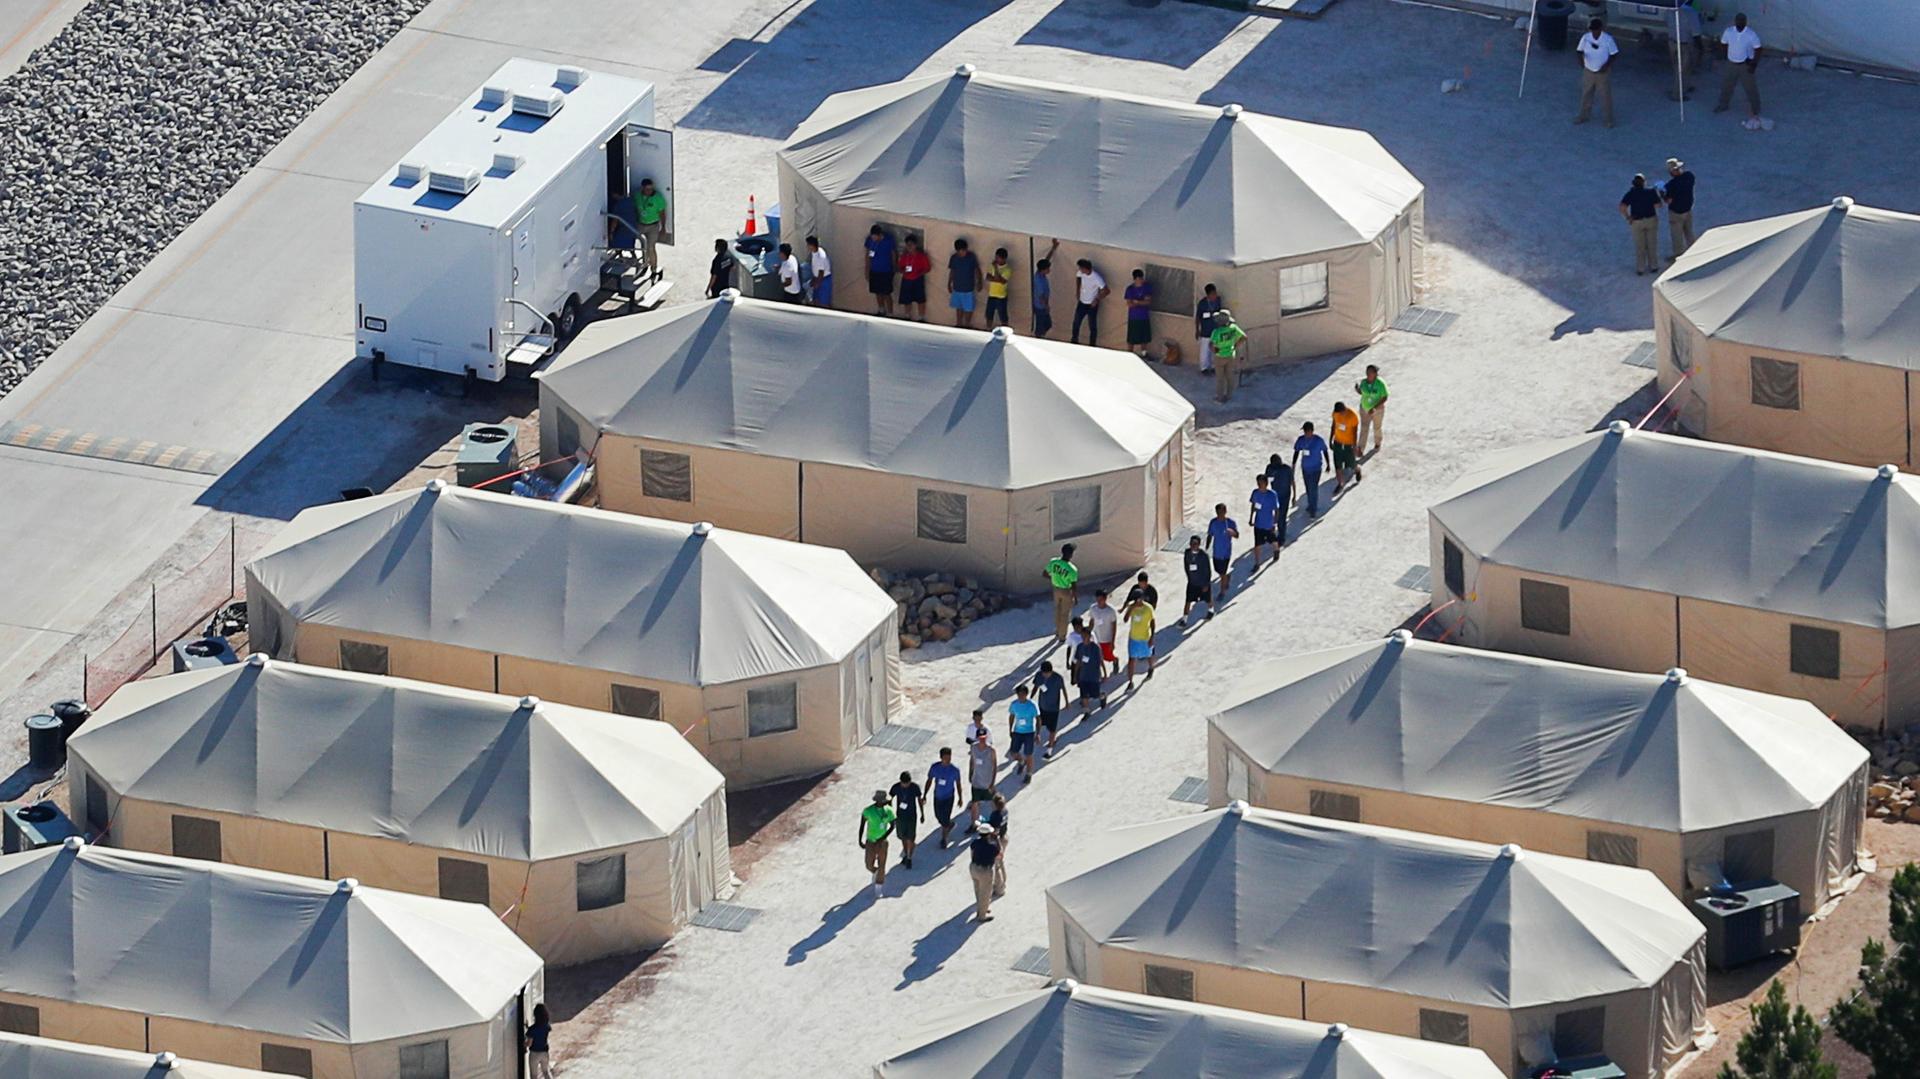 Immigrant children now housed in a tent encampment walk in single file at the facility near the Mexican border in Tornillo, Texas, June 19, 2018.